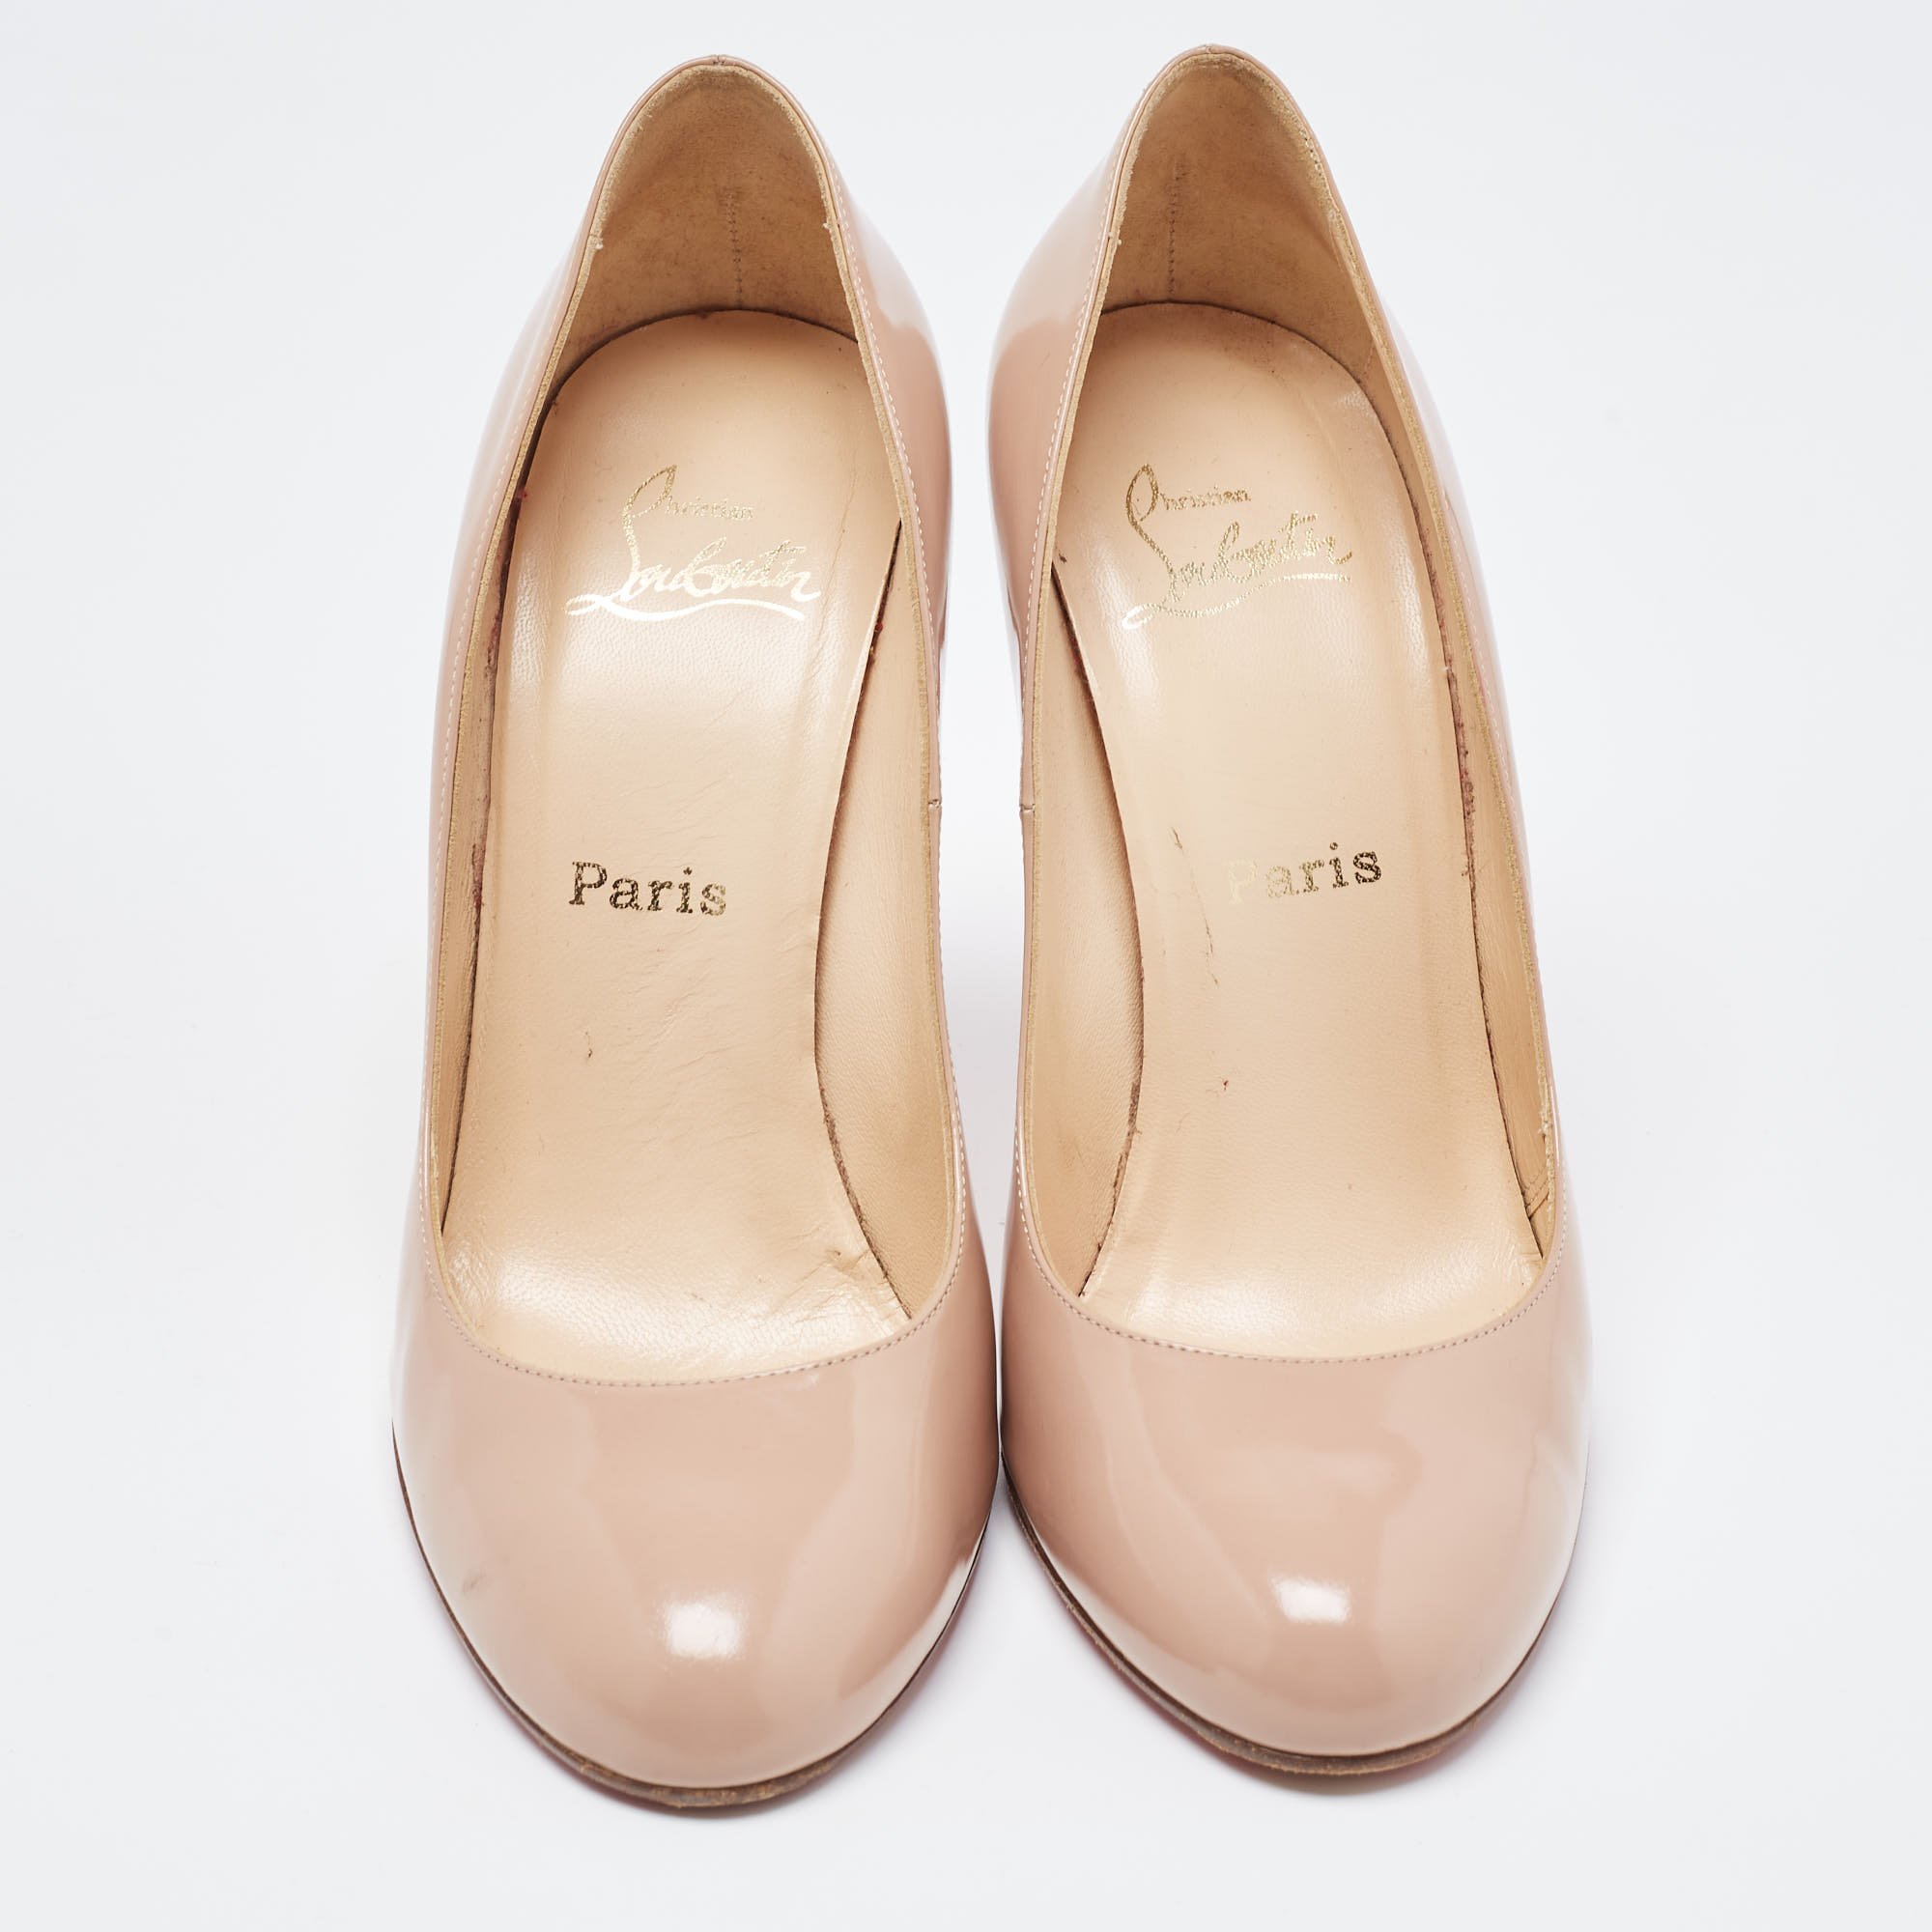 Christian Louboutin Beige Leather Simple Pumps Size 40.5